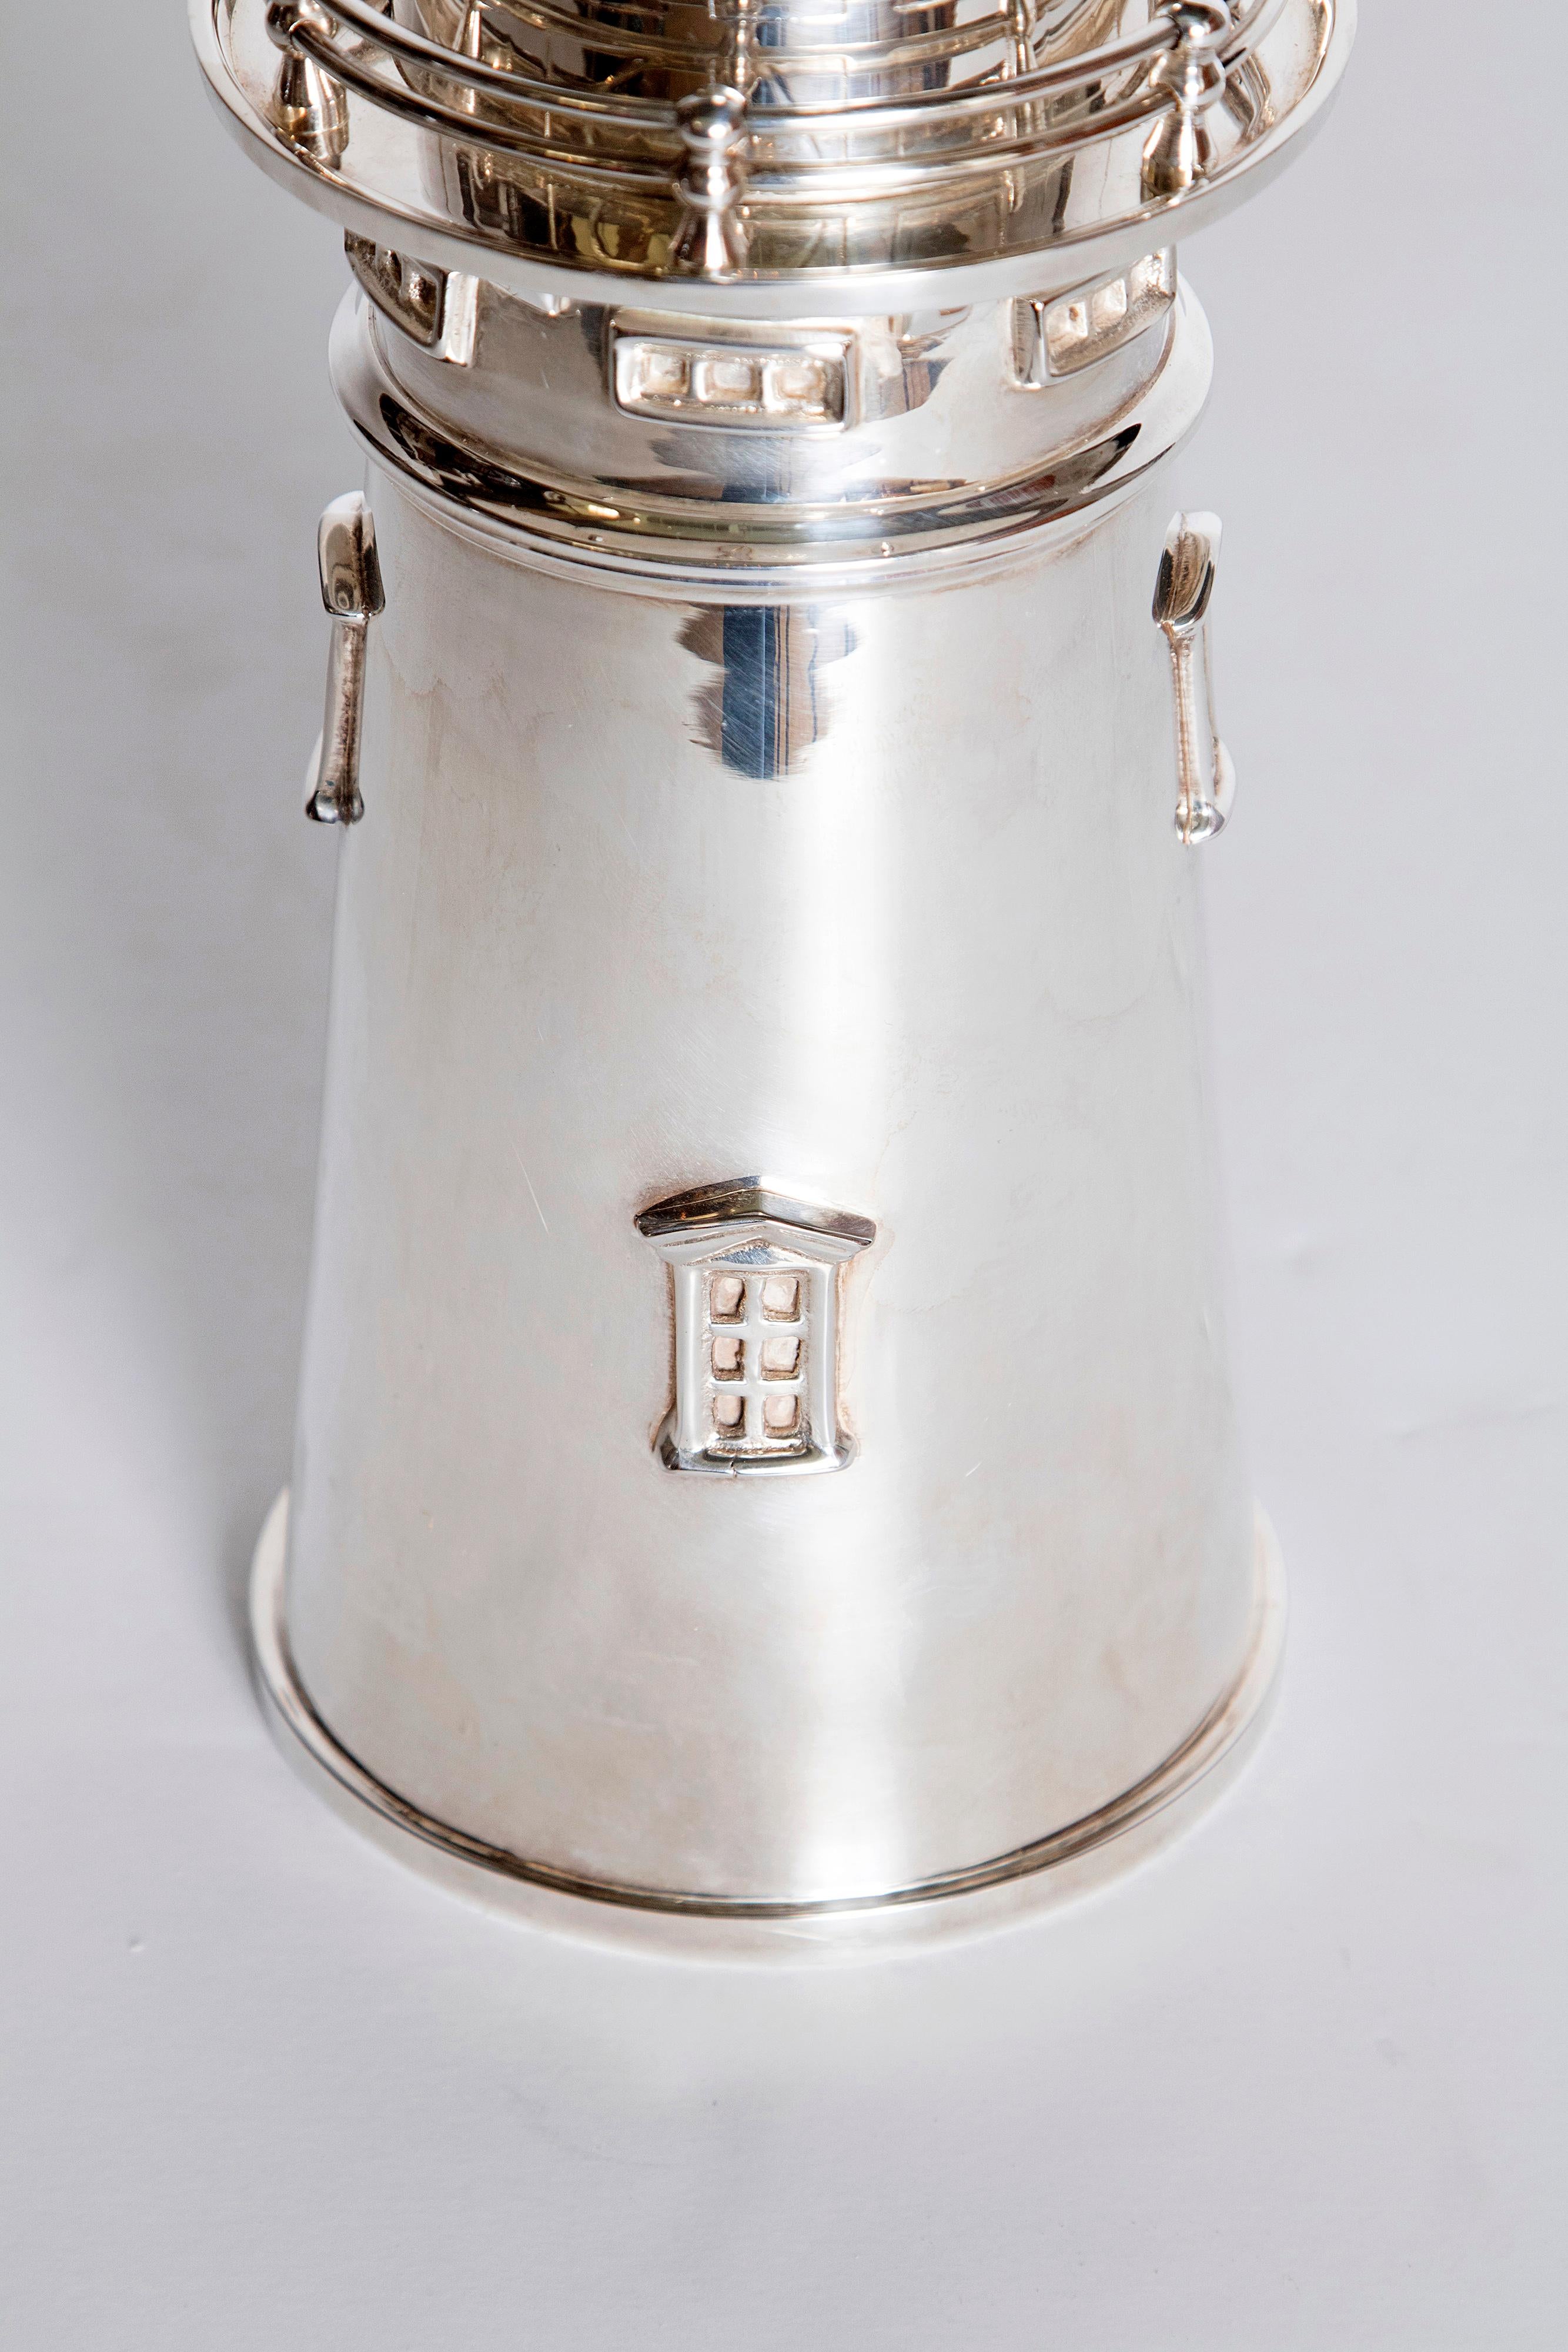 This cocktail/martini shaker is a contemporary copy after the 1927 original by International Silver Co. of Meriden, Connecticut of the 1783 Boston Lighthouse, the second oldest lighthouse in the United States. Details include windows, railings, a